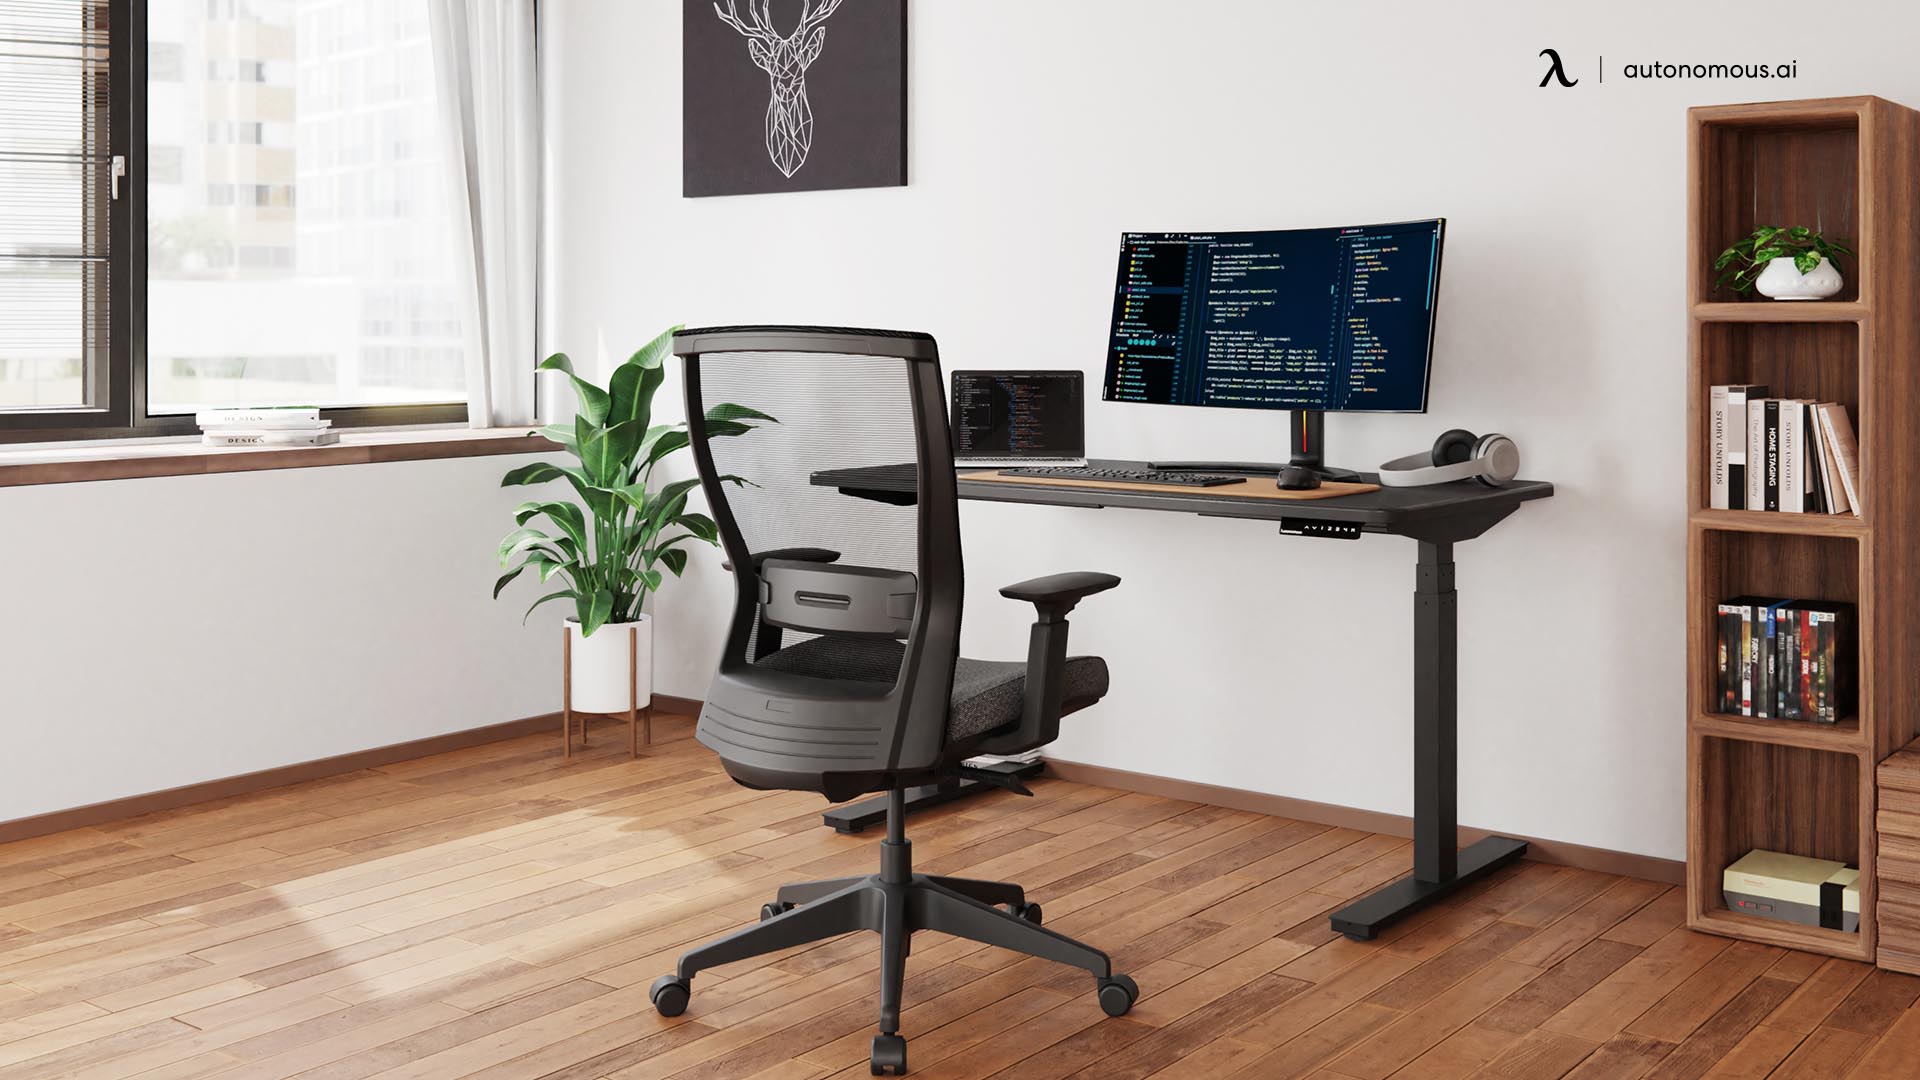 Ergonomic Chair for home office in bedroom